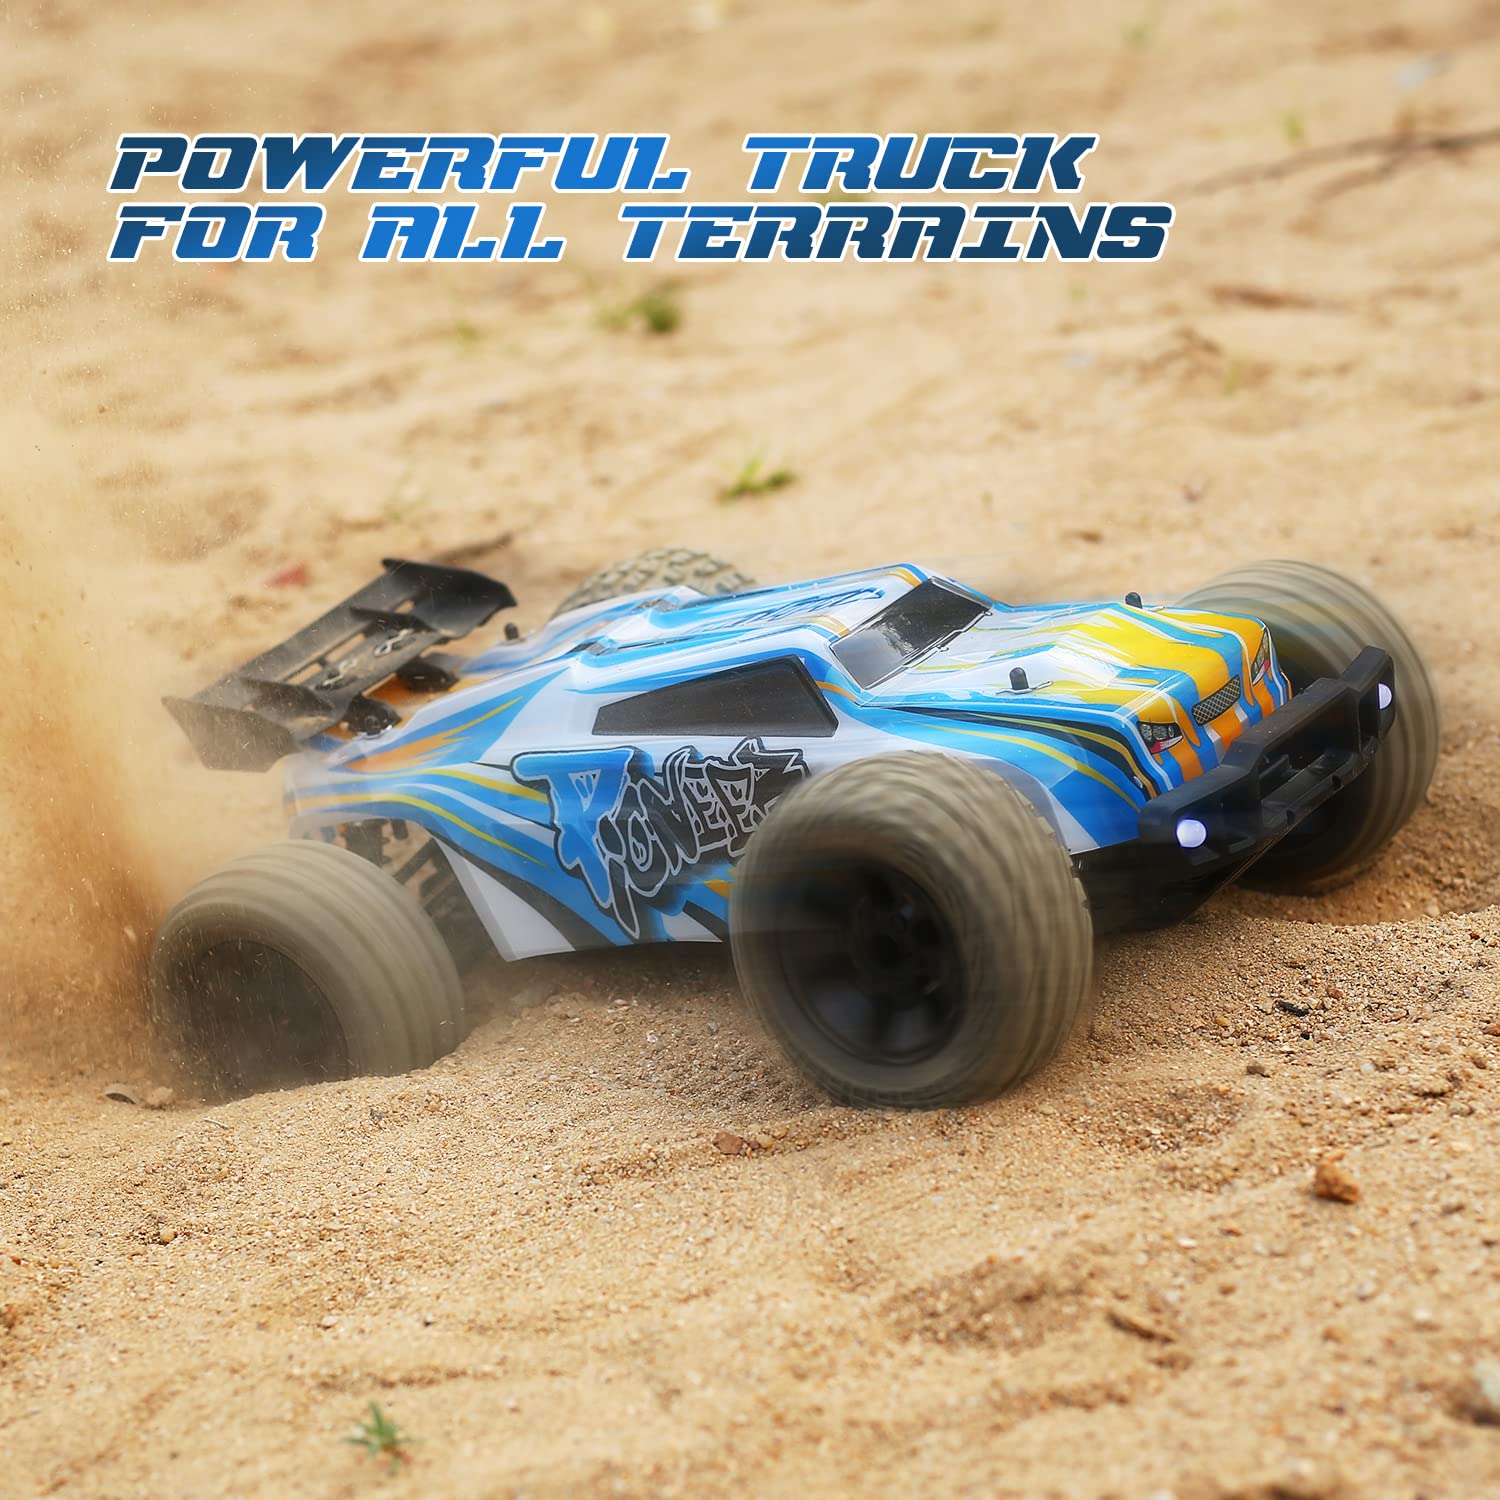 DEERC Remote Control Car 1:10 Scale RC Cars 48+ KM/H High Speed 40+ min Play , 4WD All Terrains Off Road Monster Truck for Adults and Kids Hobby RC Truck Vehicle, 2 Battery Crawler Toy Gift for Boys